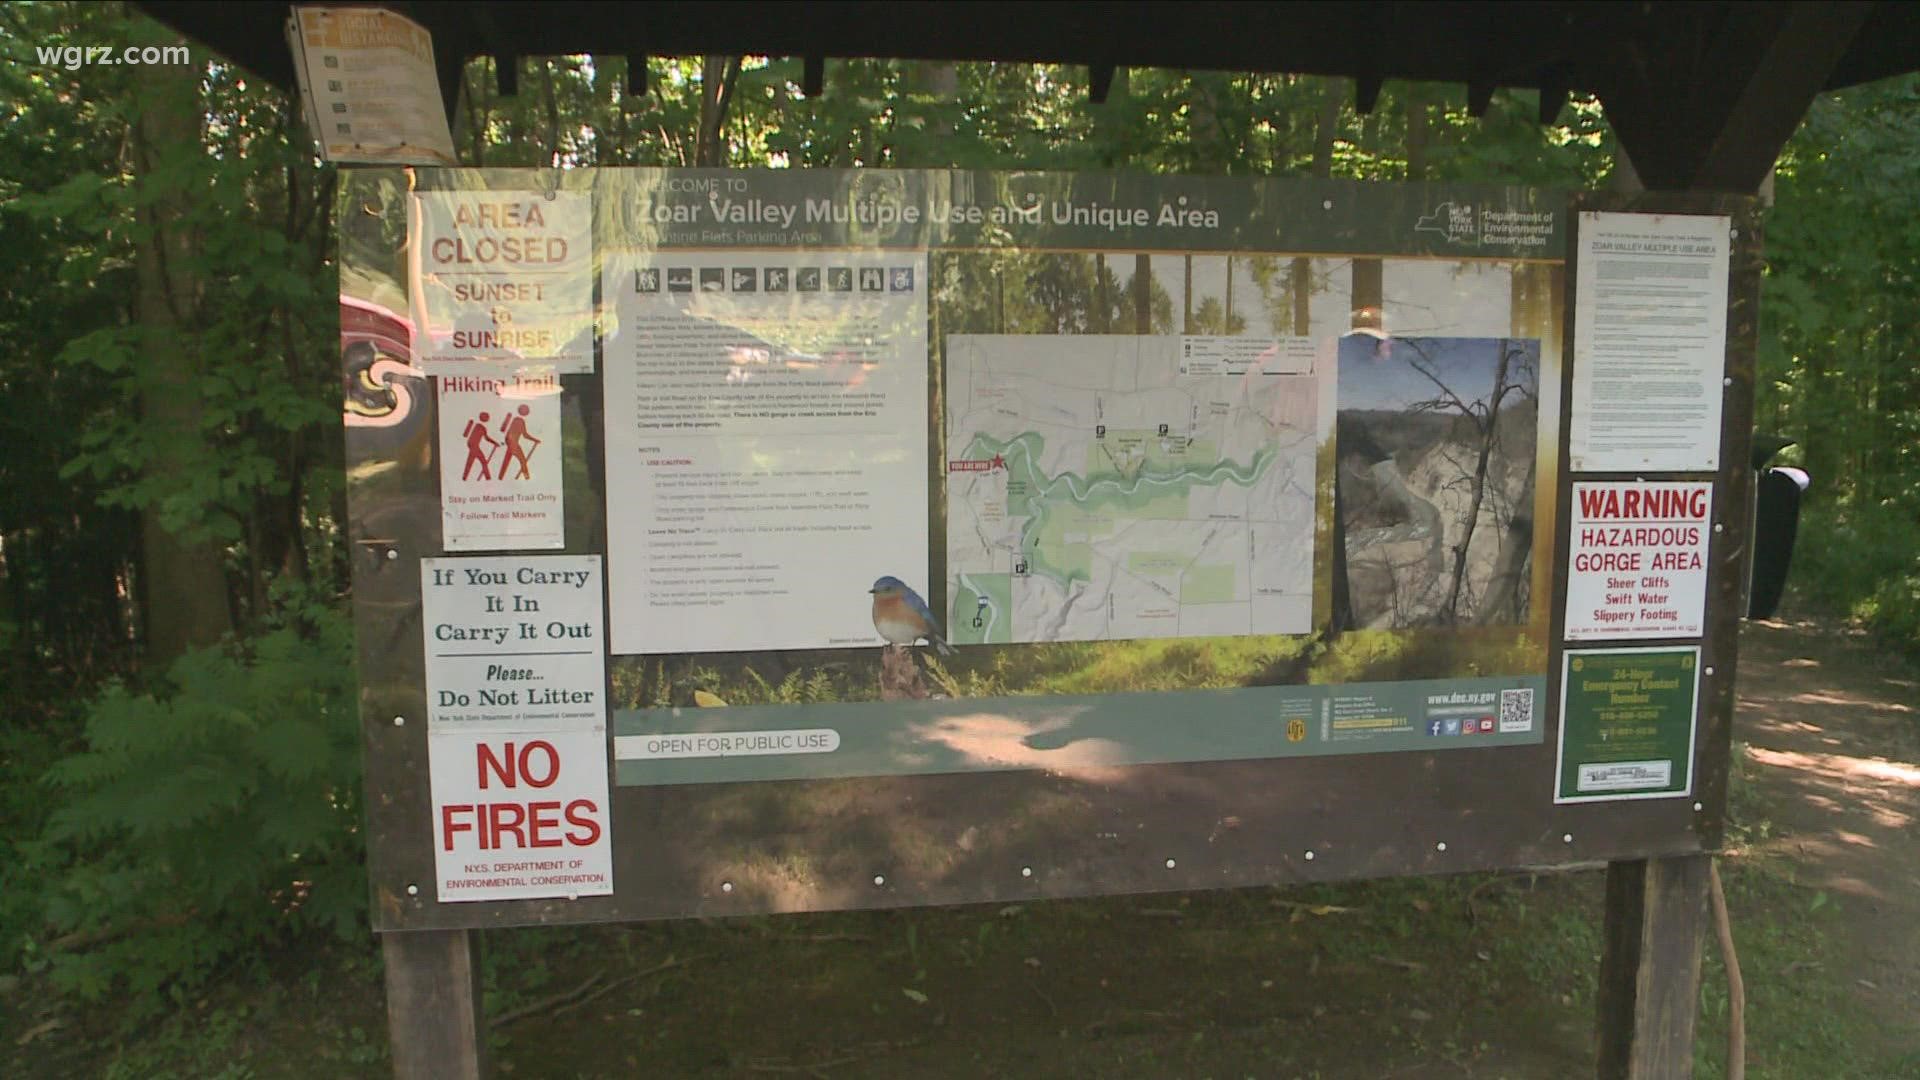 The New York State Department of Environmental Conservation says the criminals could face misdemeanor or even felony charges for intentionally removing the signs.